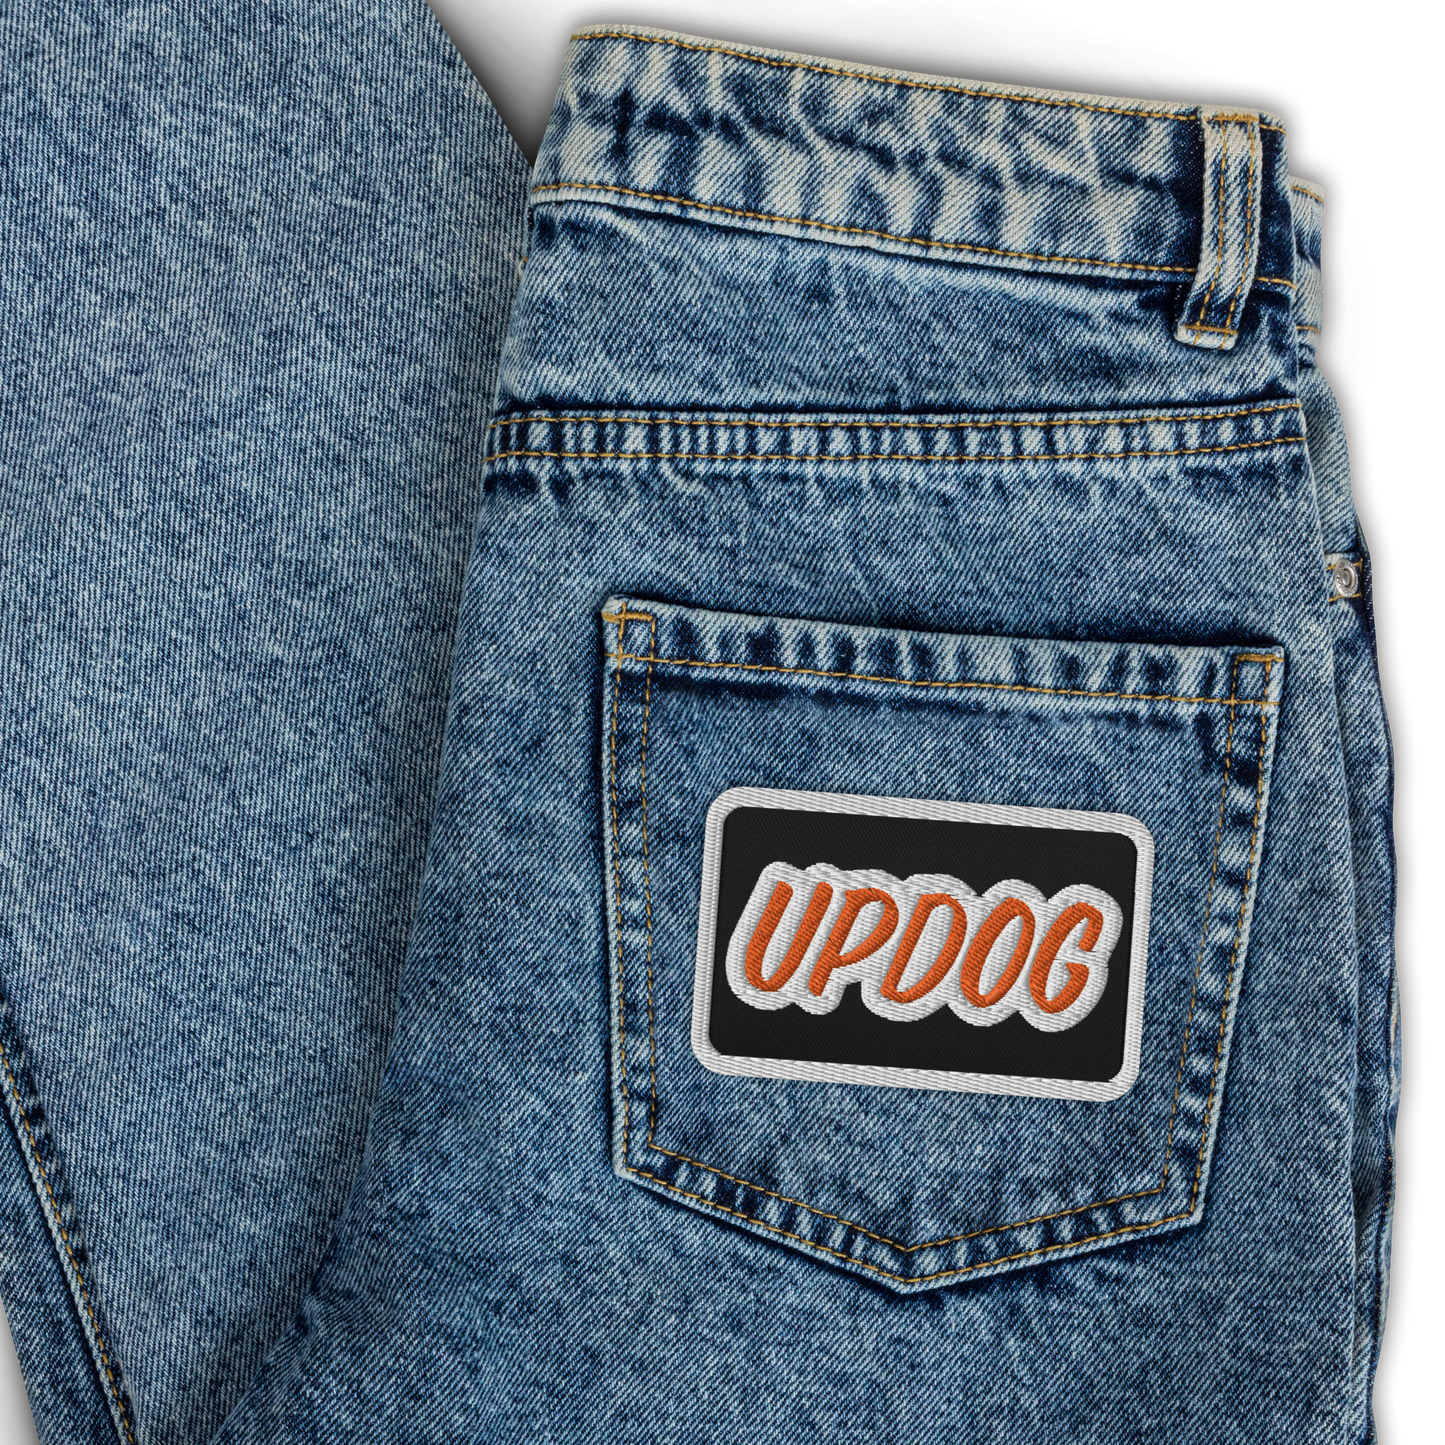 Updog Embroidered patch